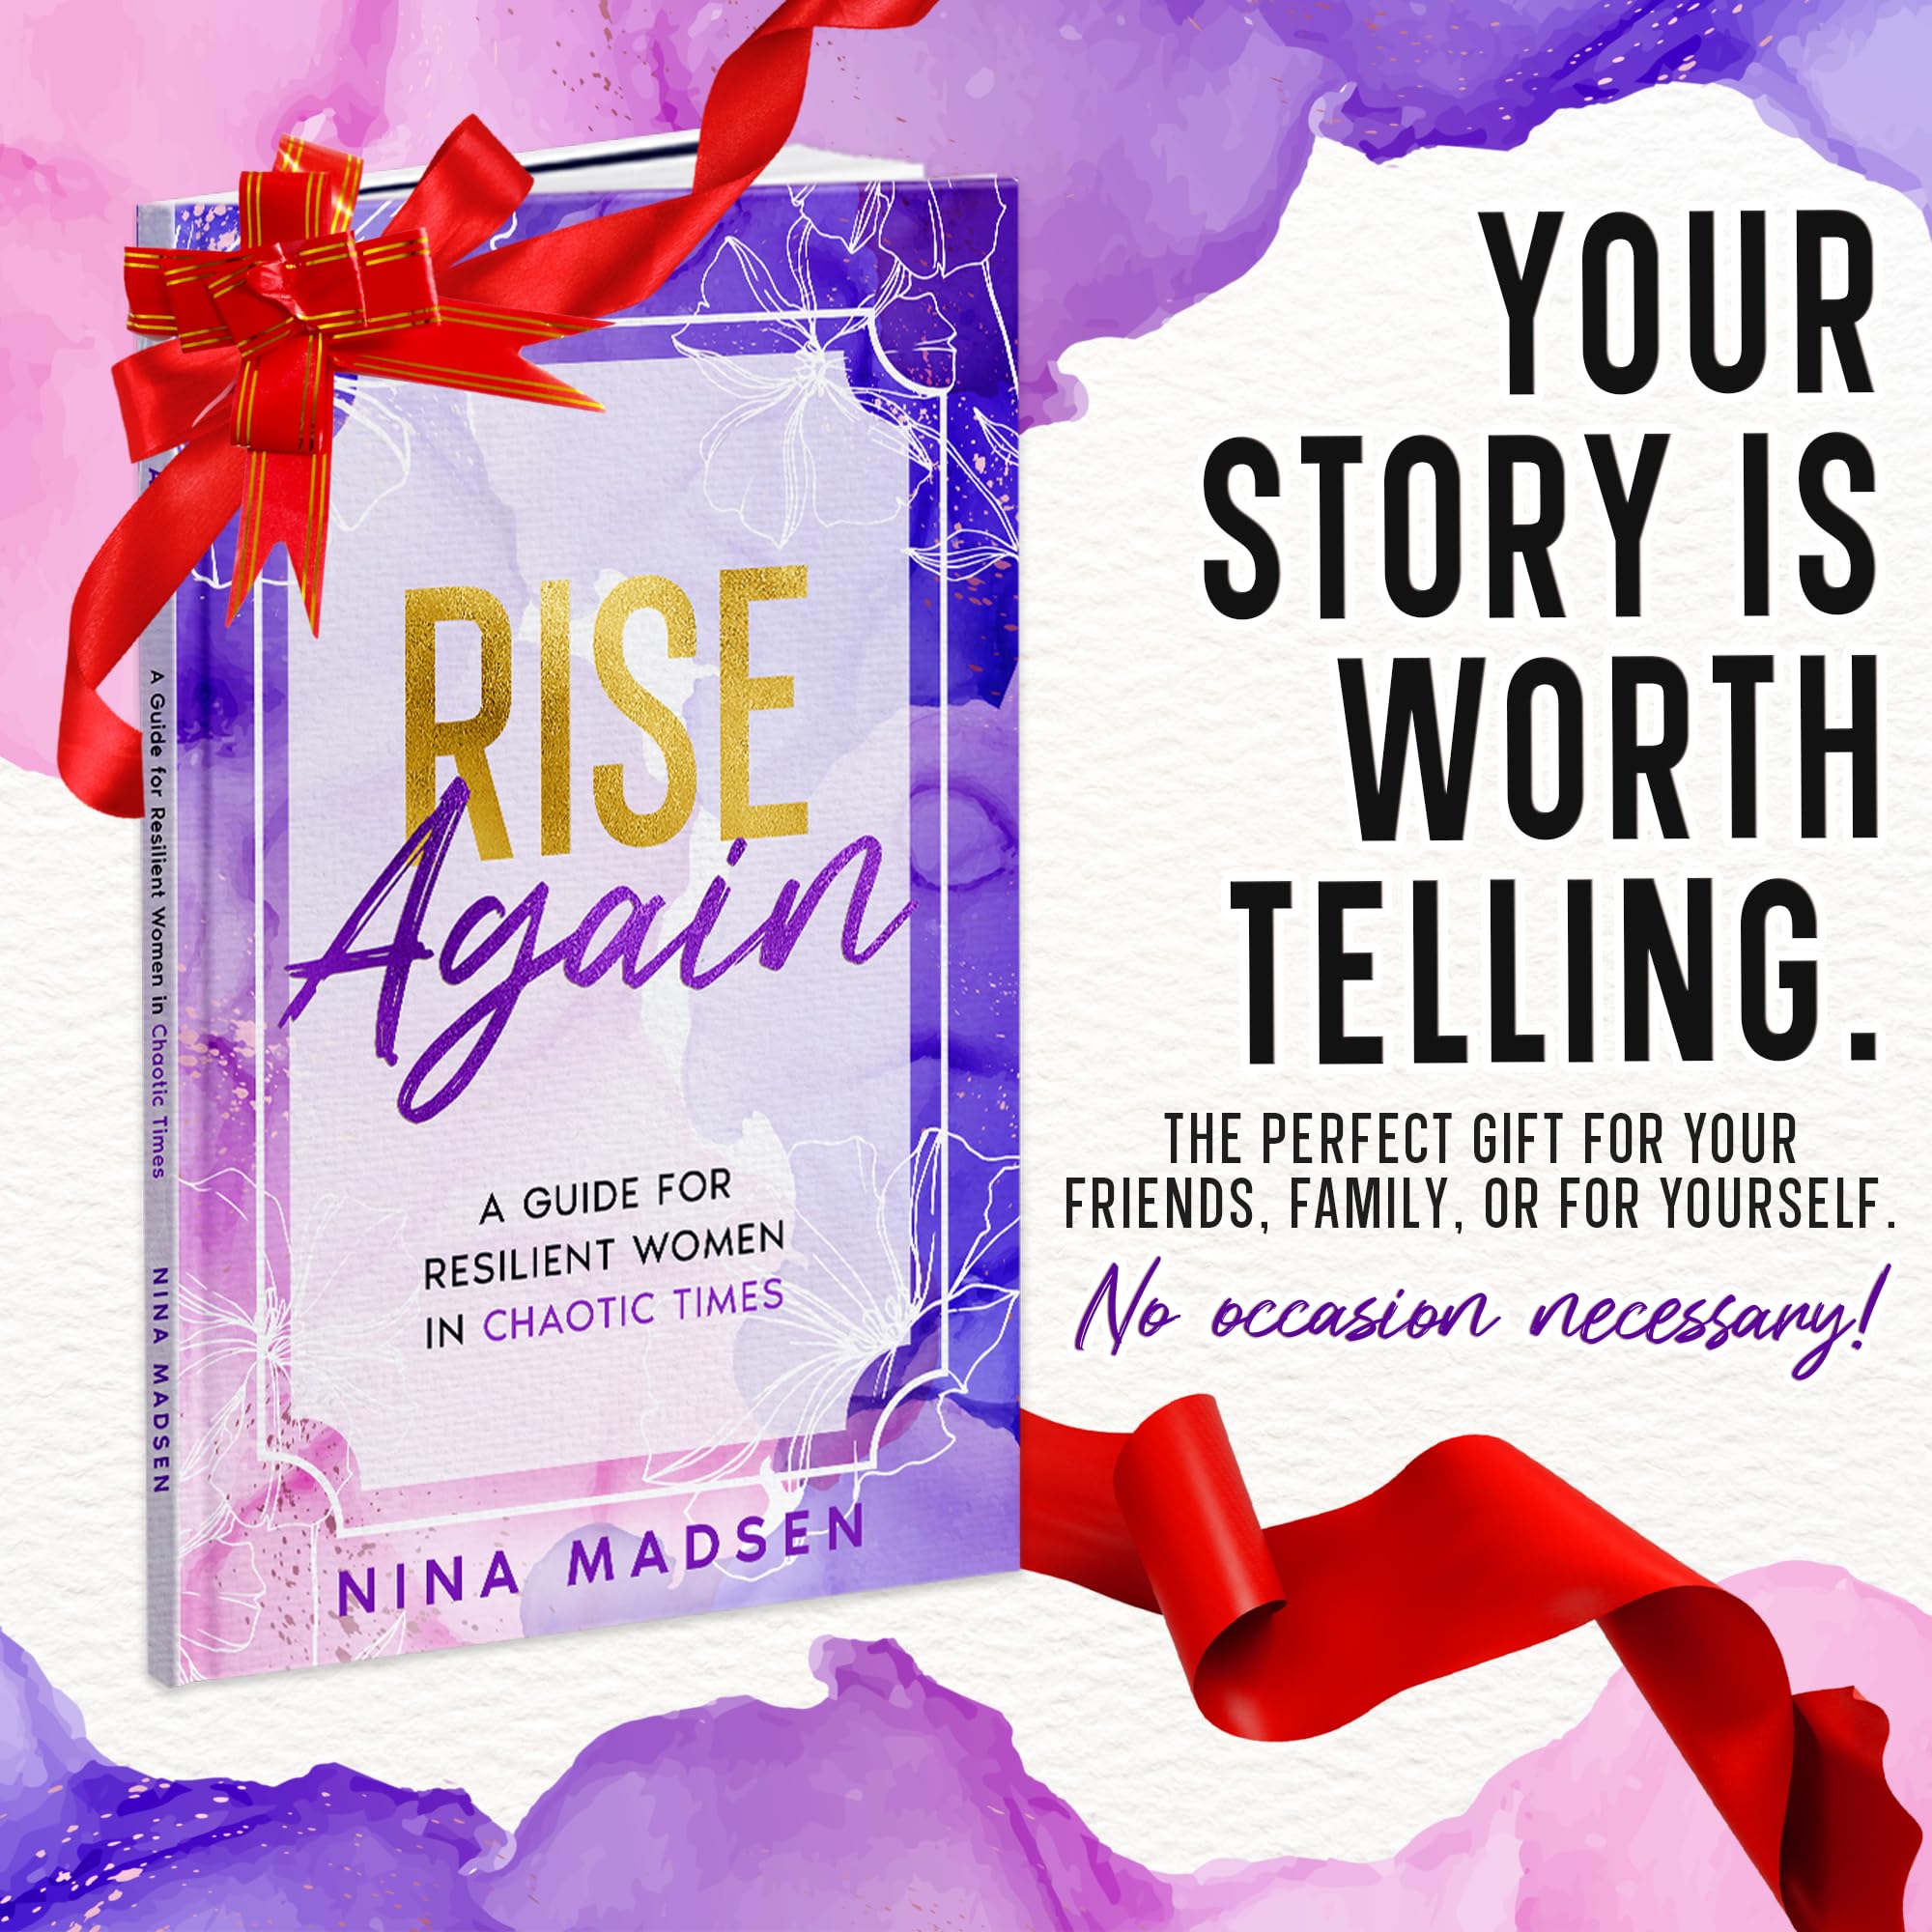 Rise Again: A Guide for Resilient Women in Chaotic Times (EmpowerHer: A Series on Resilience, Positivity, and Self-Love)